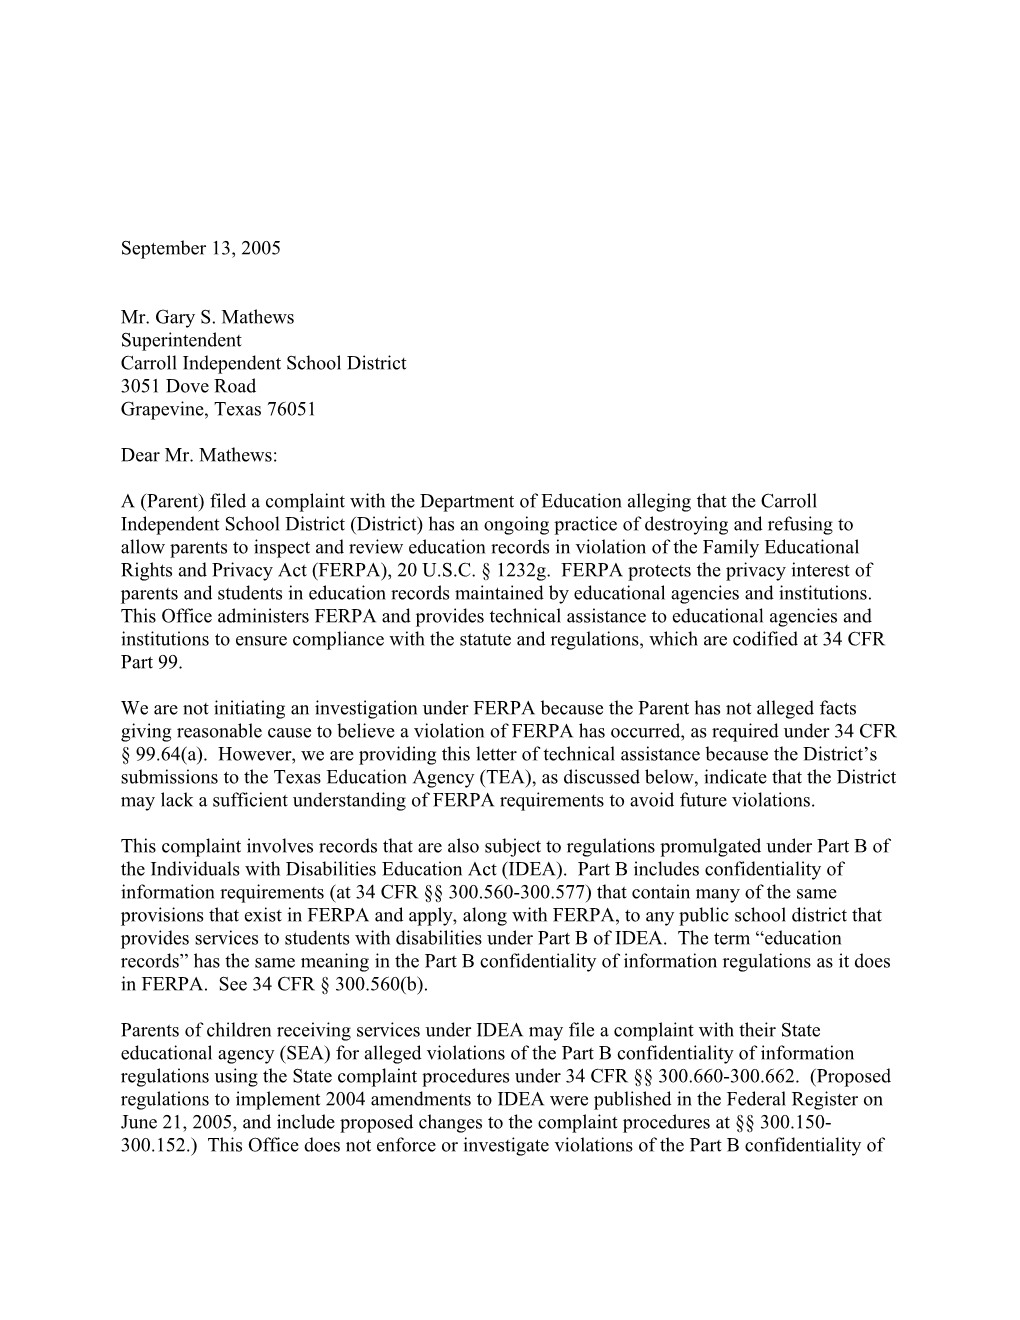 Letter to Carroll Independent School District Re: Destruction of Student Test Data (MS Word)